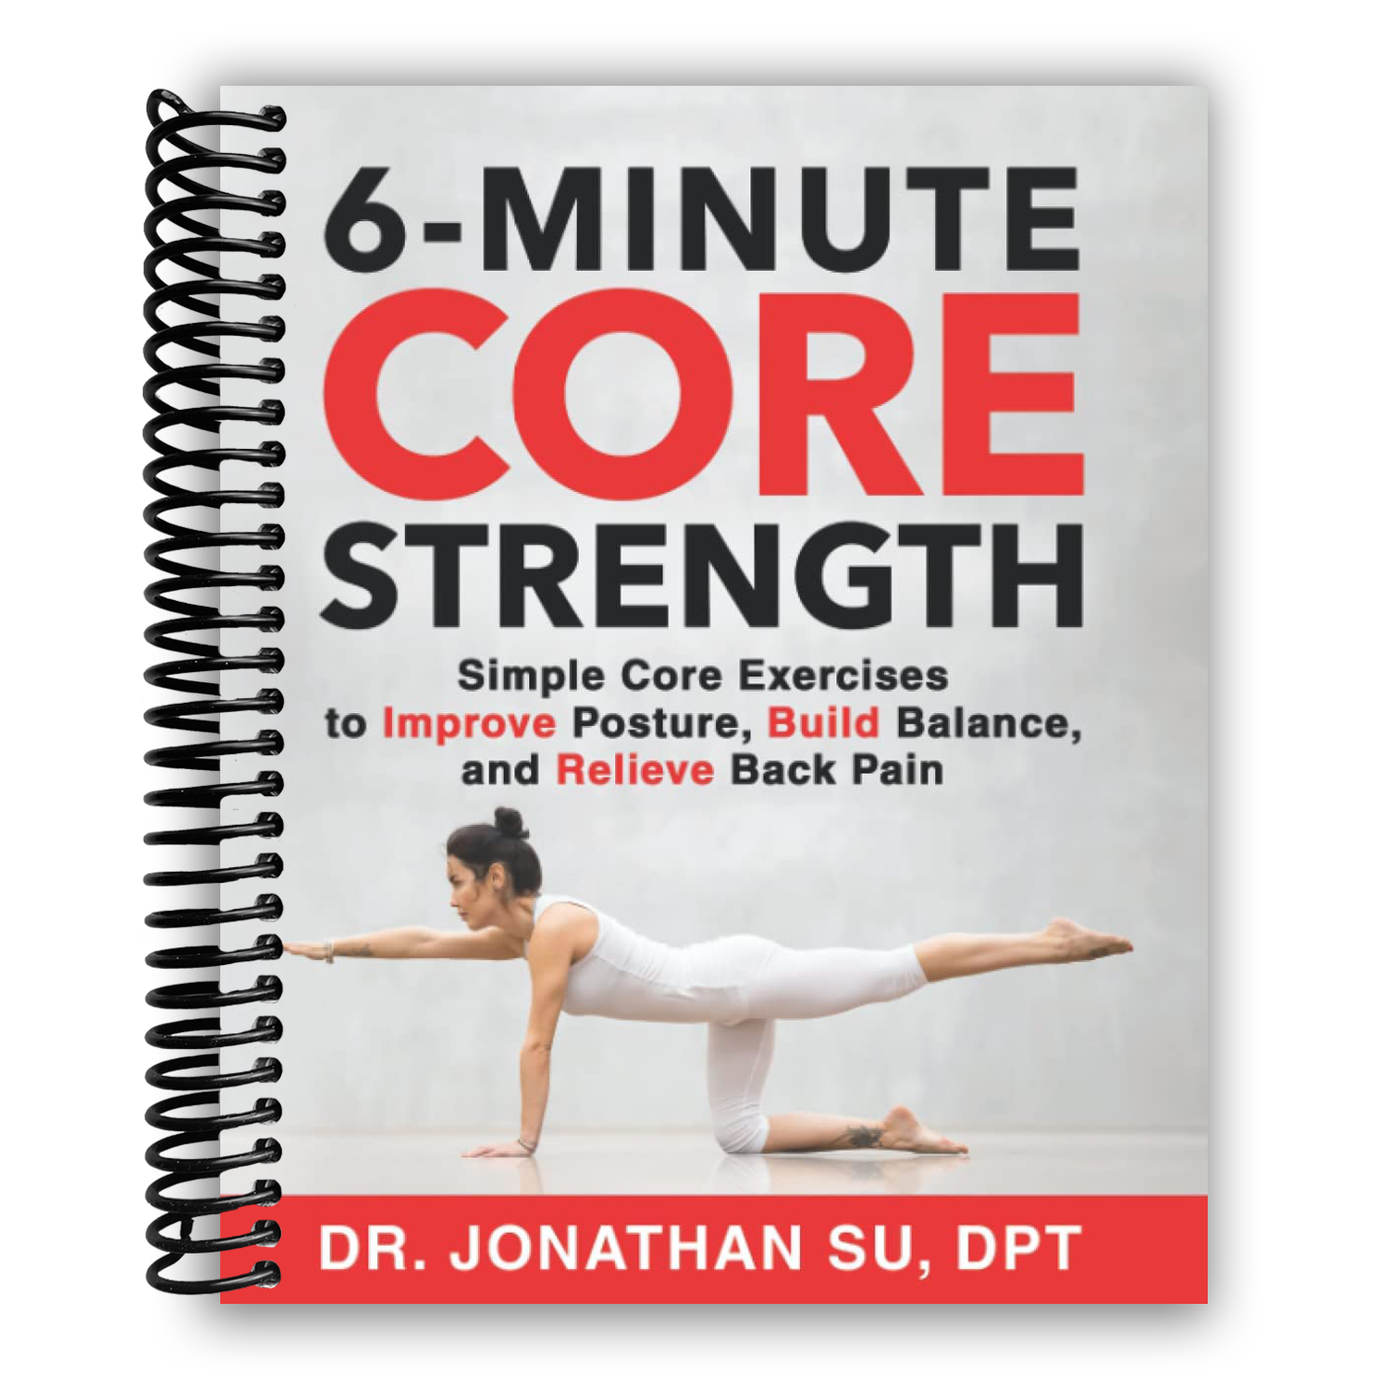 6-Minute Core Strength: Simple Core Exercises to Improve Posture, Build Balance, and Relieve Back Pain(Spiral Bound)